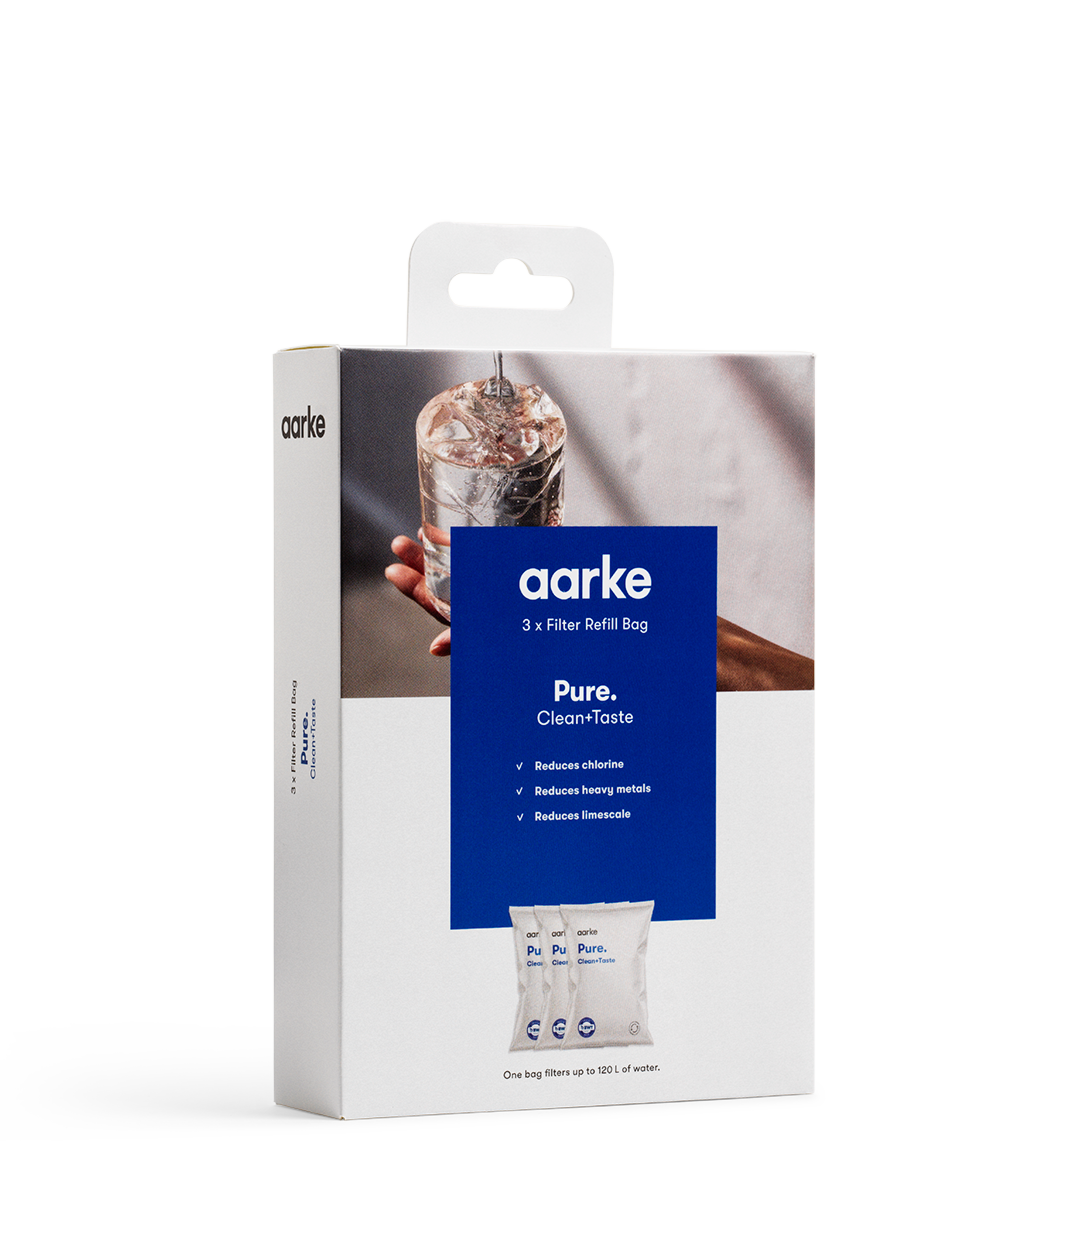 Aarke Pure Filter Granules box. Front view.